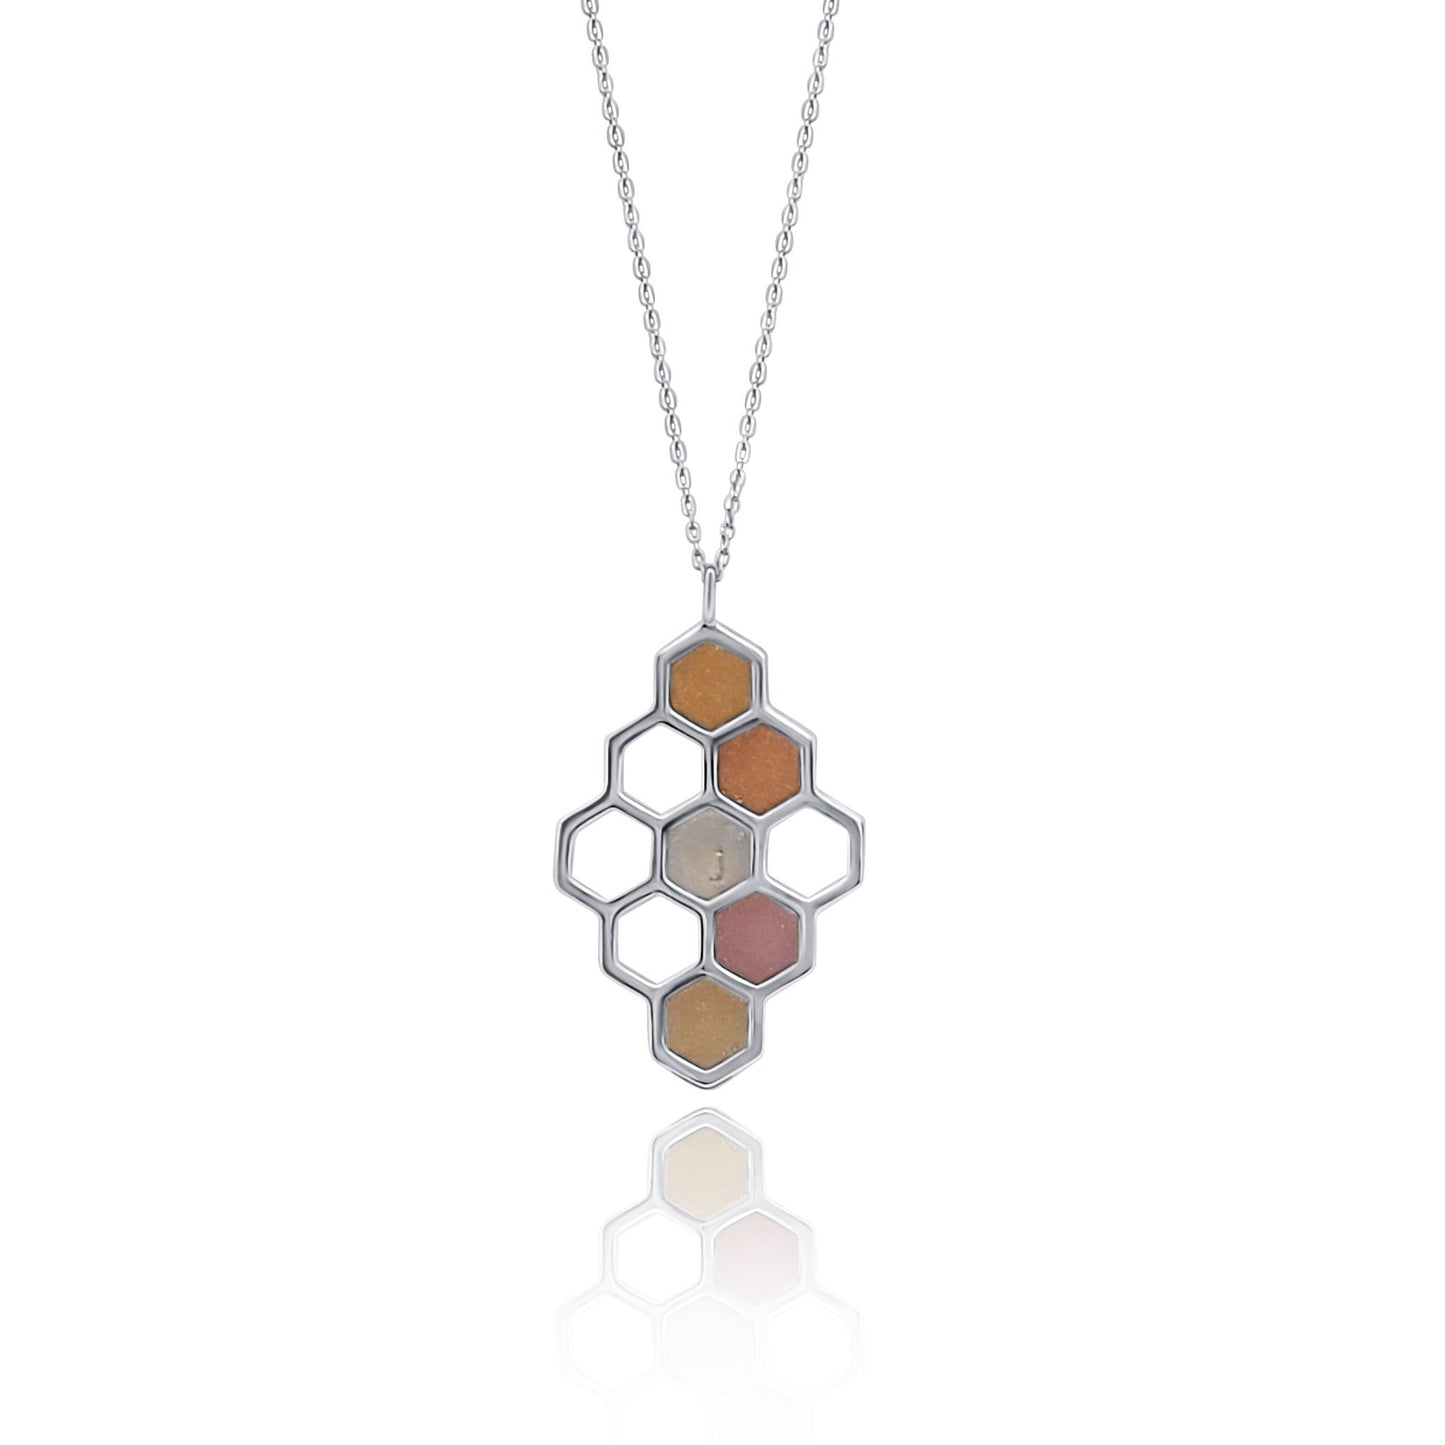 silver honeycomb pendant necklace with rose and gold resin infill and small citrine gemstone